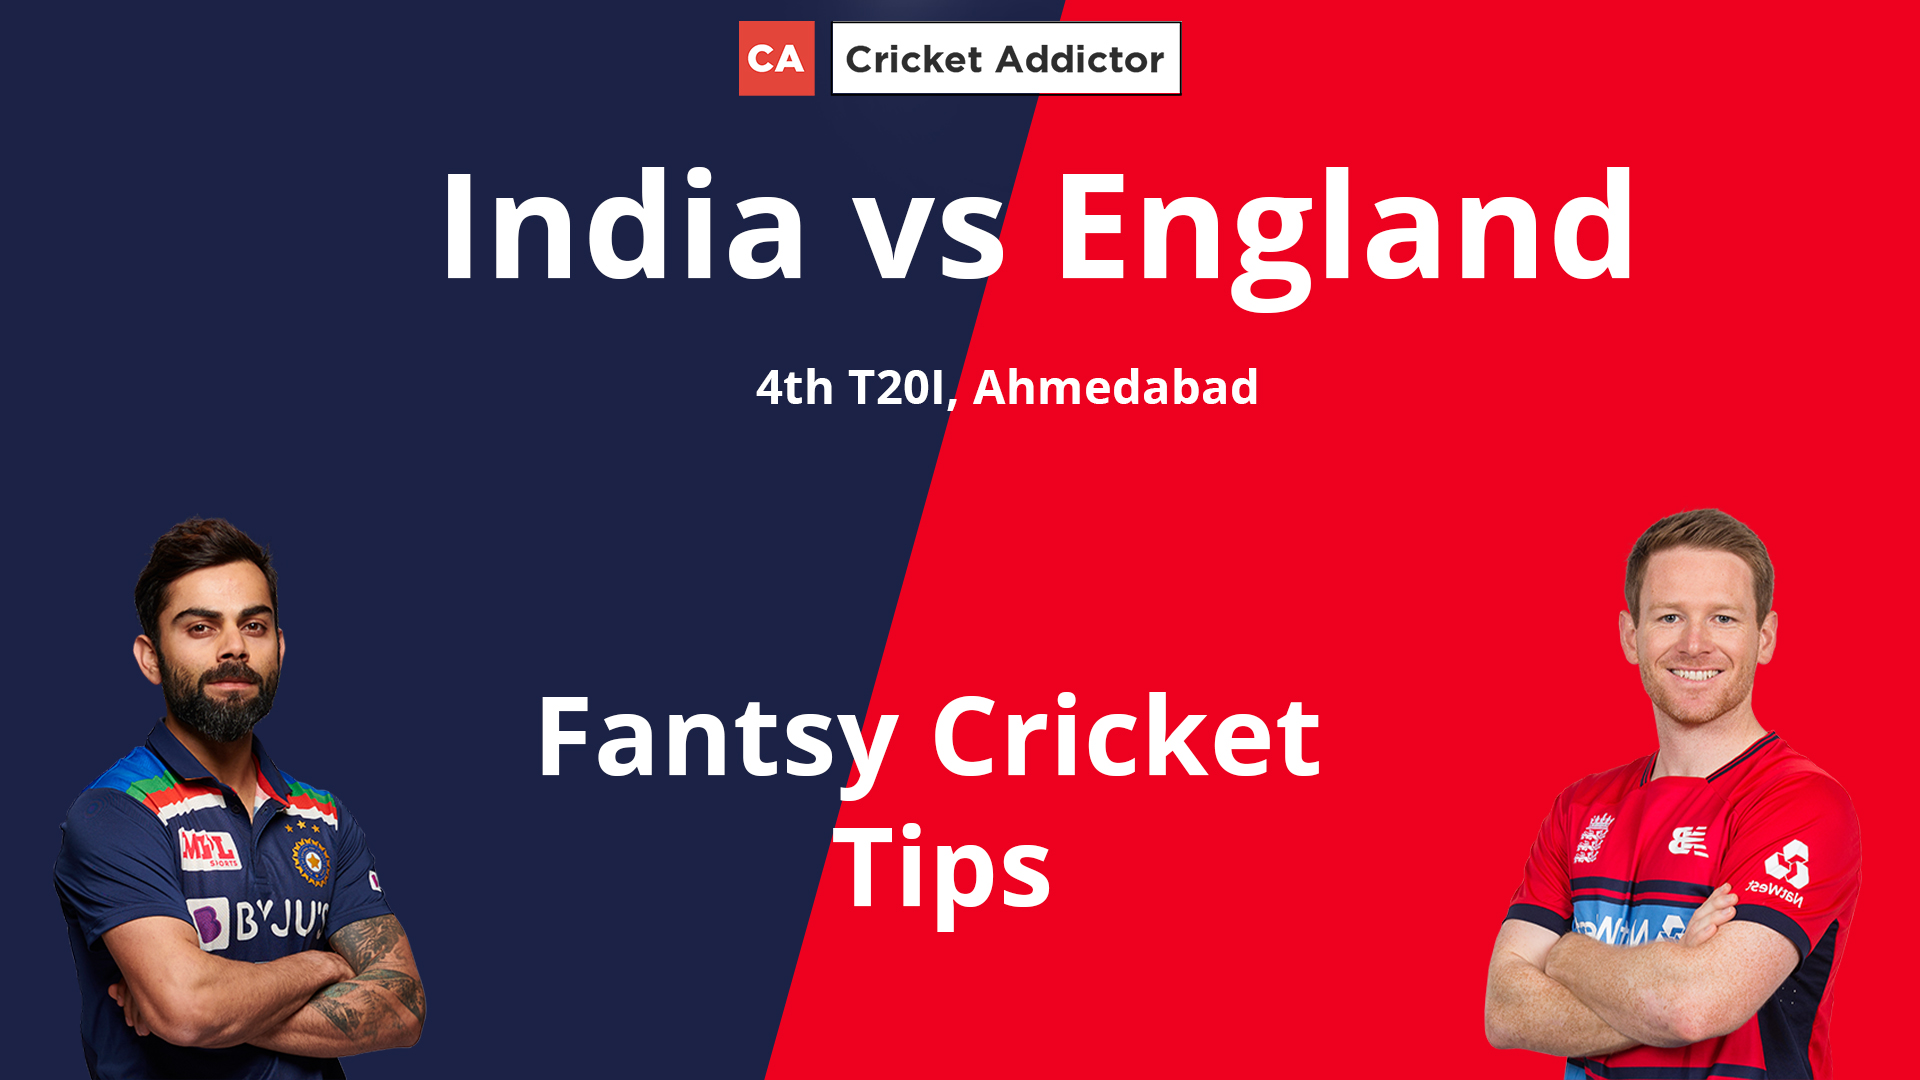 IND vs ENG 4th T20I Dream11 Prediction, Fantasy Cricket Tips, Playing XI,  Pitch Report, Dream11 Team, Injury Update – England's tour of India